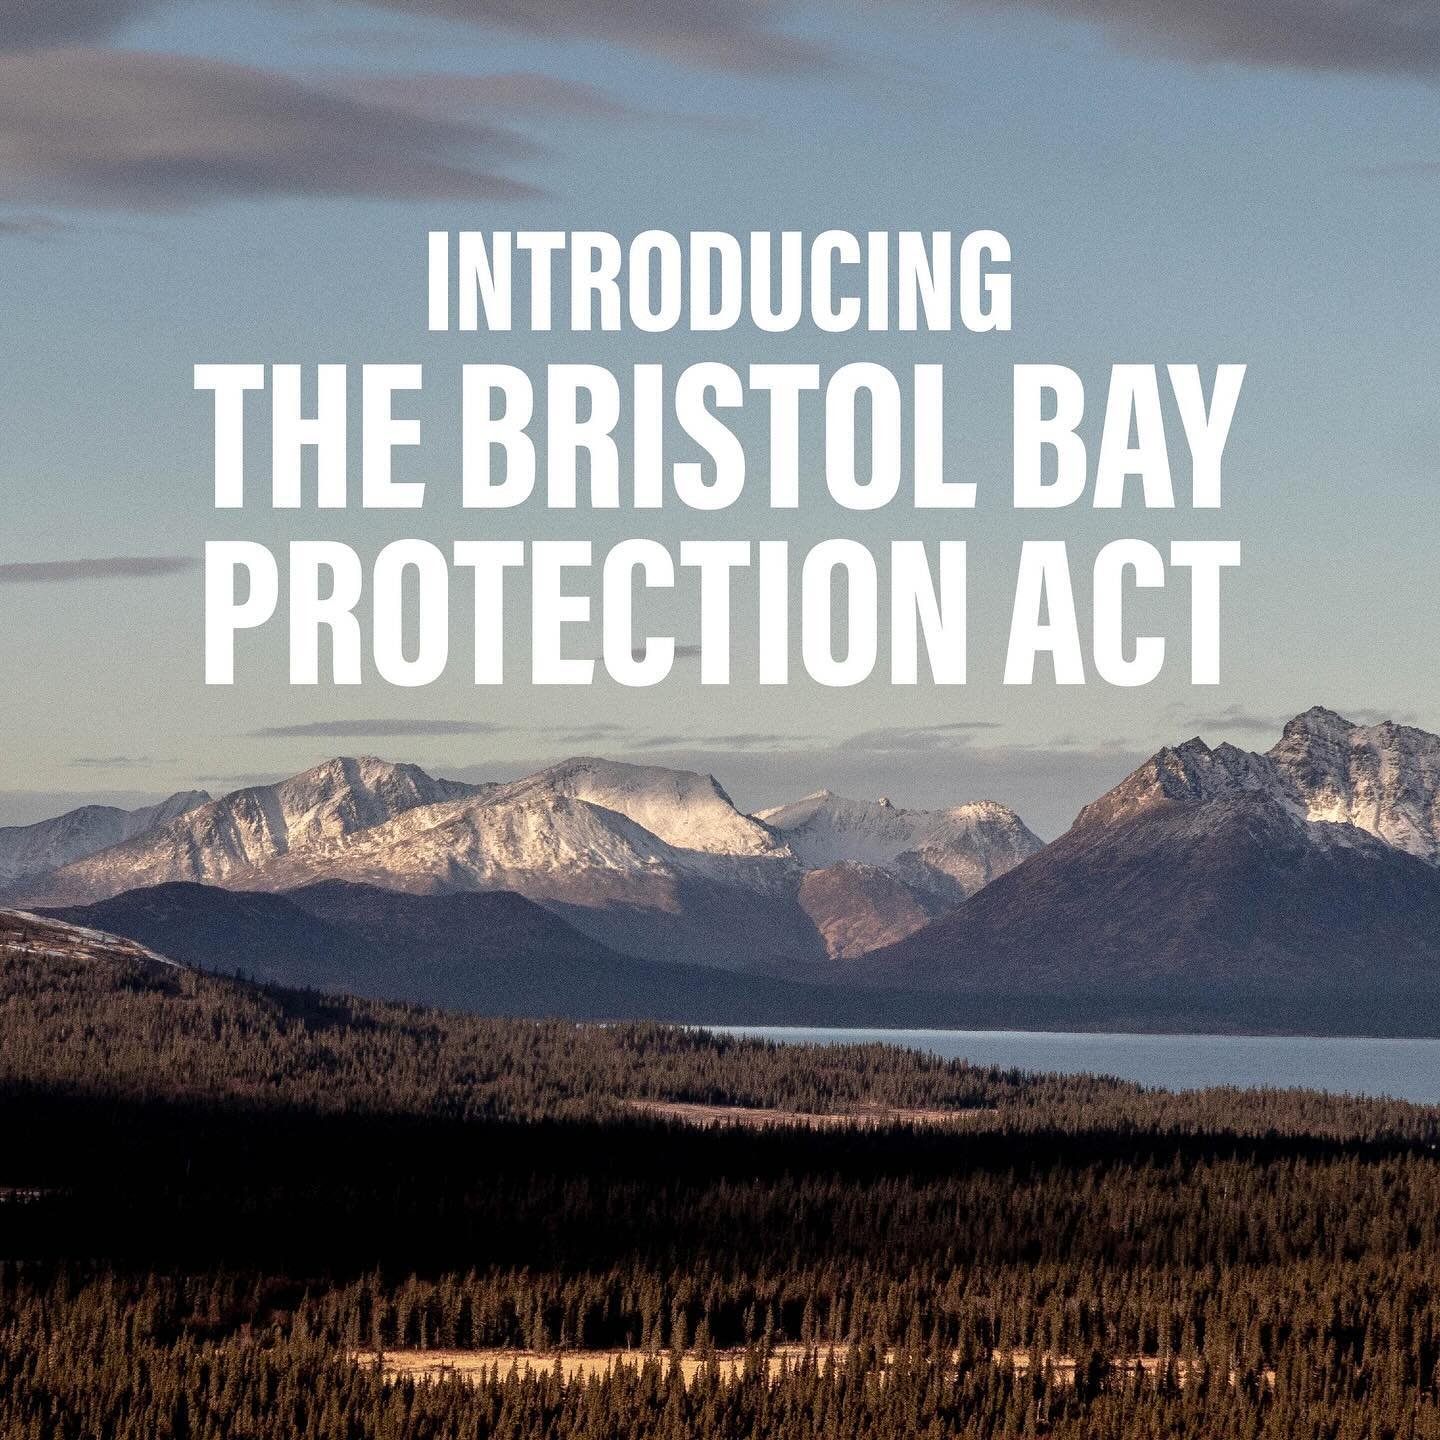 Fat brown bears. Gigantic rainbow trout. Endless scenery. There is no place like Bristol Bay. Recently, @Rep_Peltola introduced the Bristol Bay Protection Act through Congress to help ensure this region may continue unharmed forever. Link in bio to l